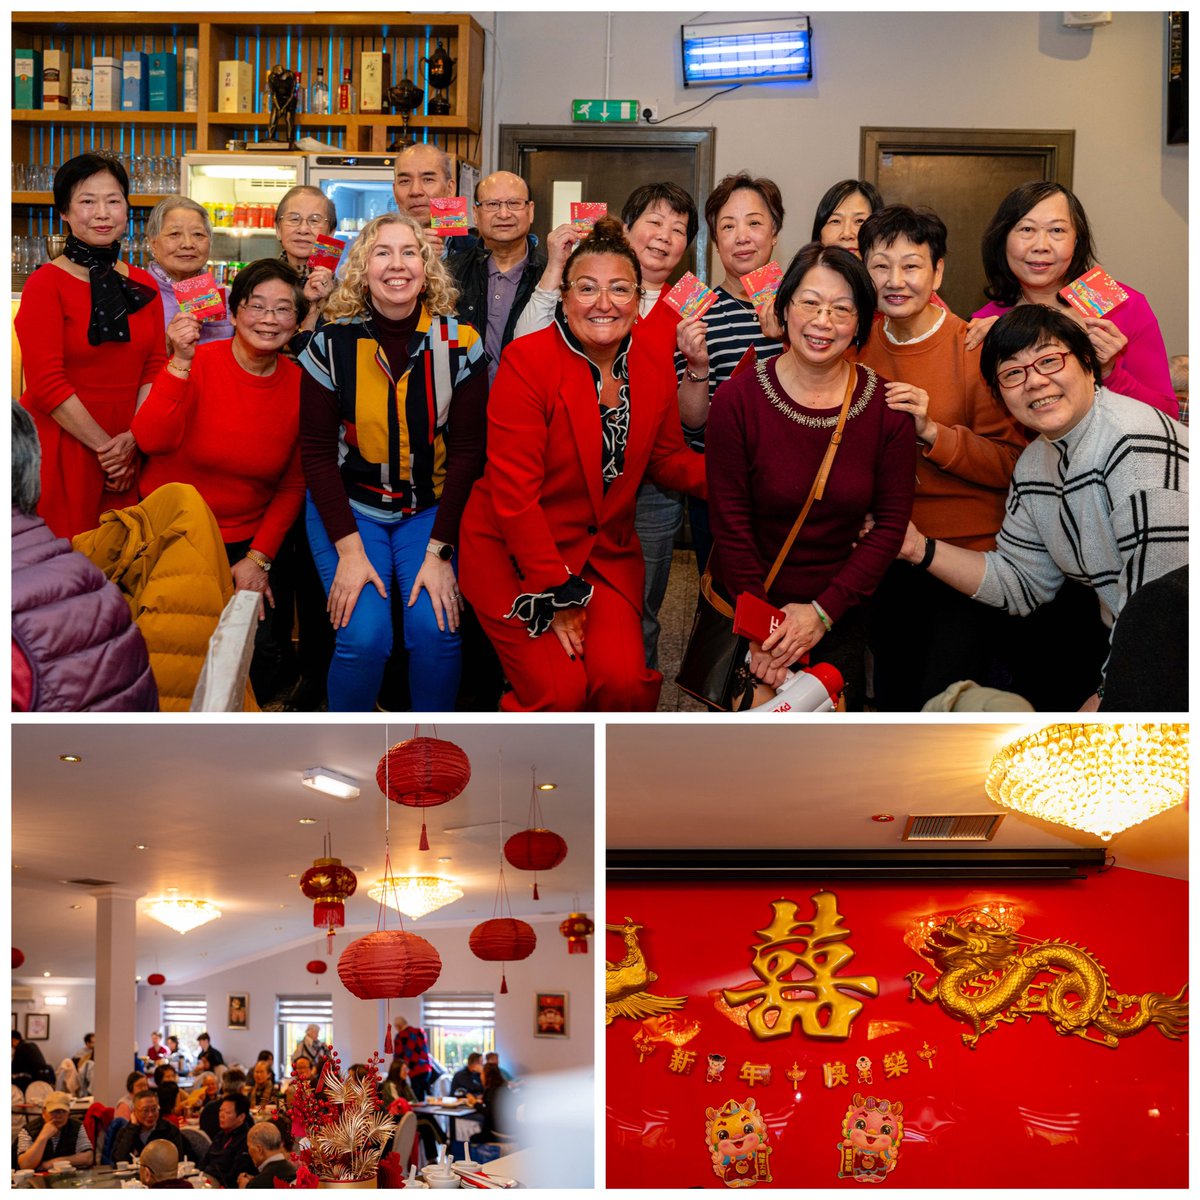 We are thrilled to have commemorated the #lanternfestival as a part of Chinese New Year celebrations with our service users, colleagues, and officials from the Scottish government. We extend our gratitude to the @ScotGovFairer for joining us in these joyous celebrations.